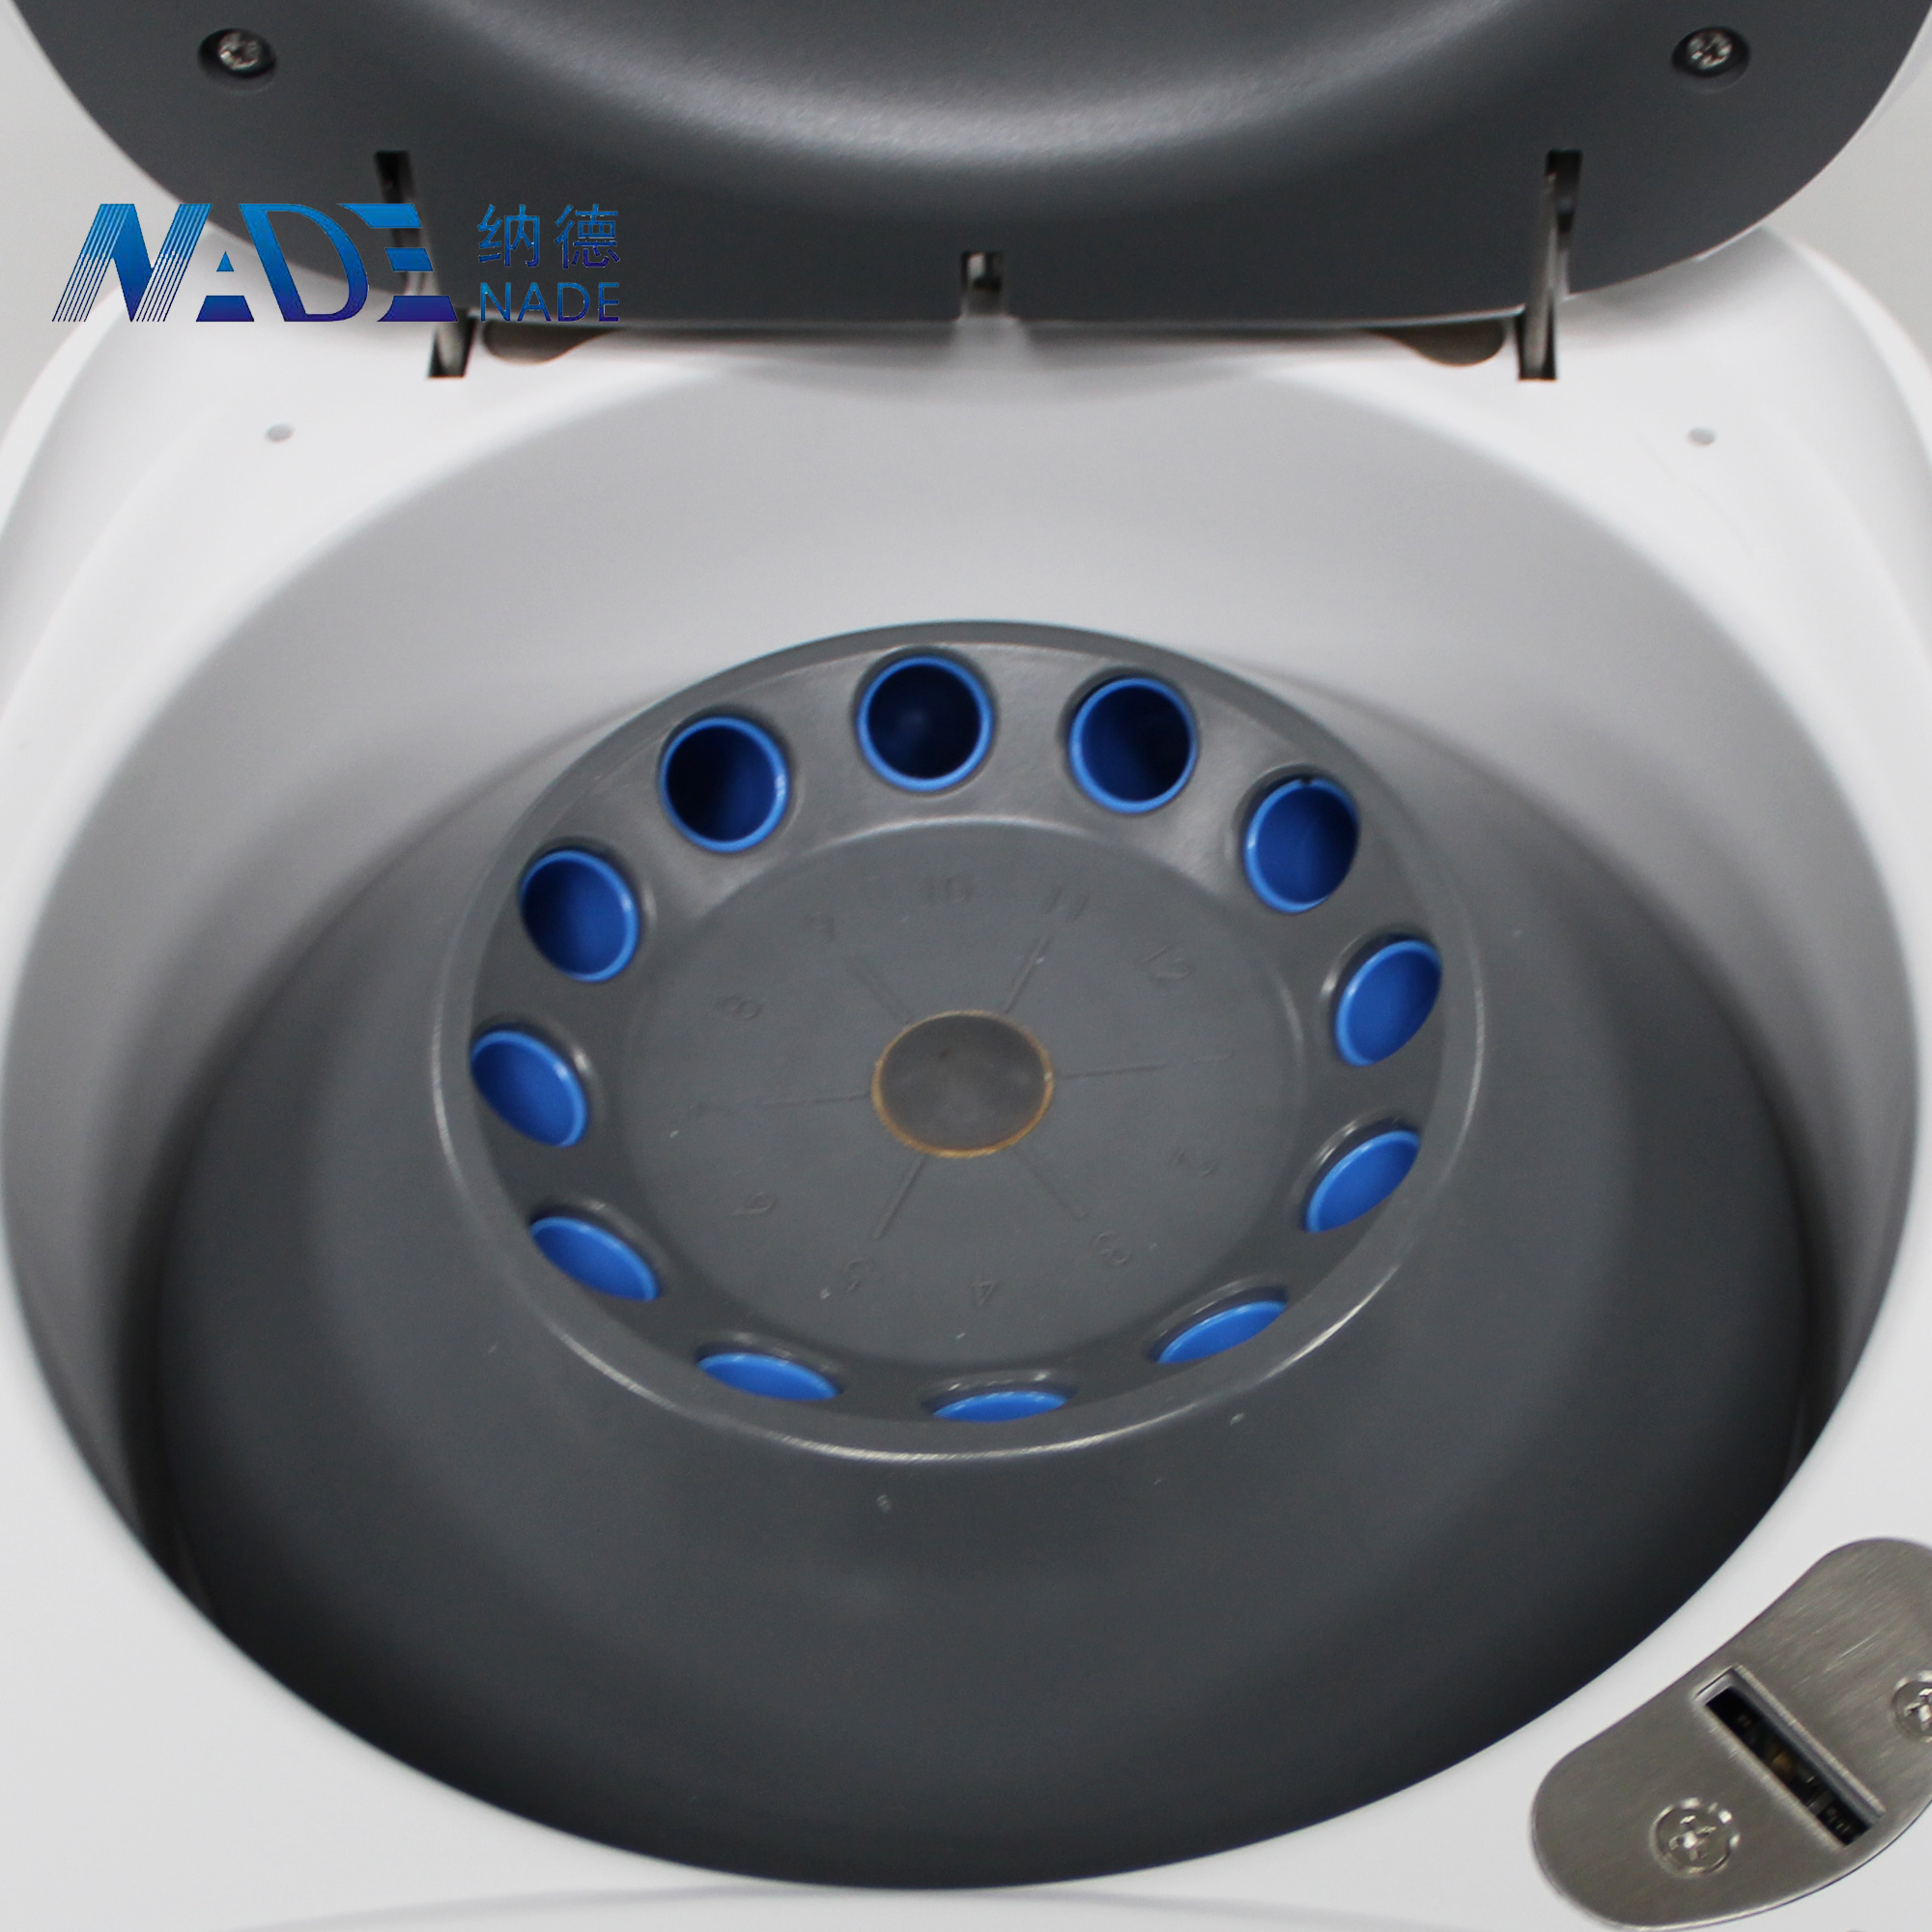 NADE Clinical Centrifuge DM0412 CE certificated